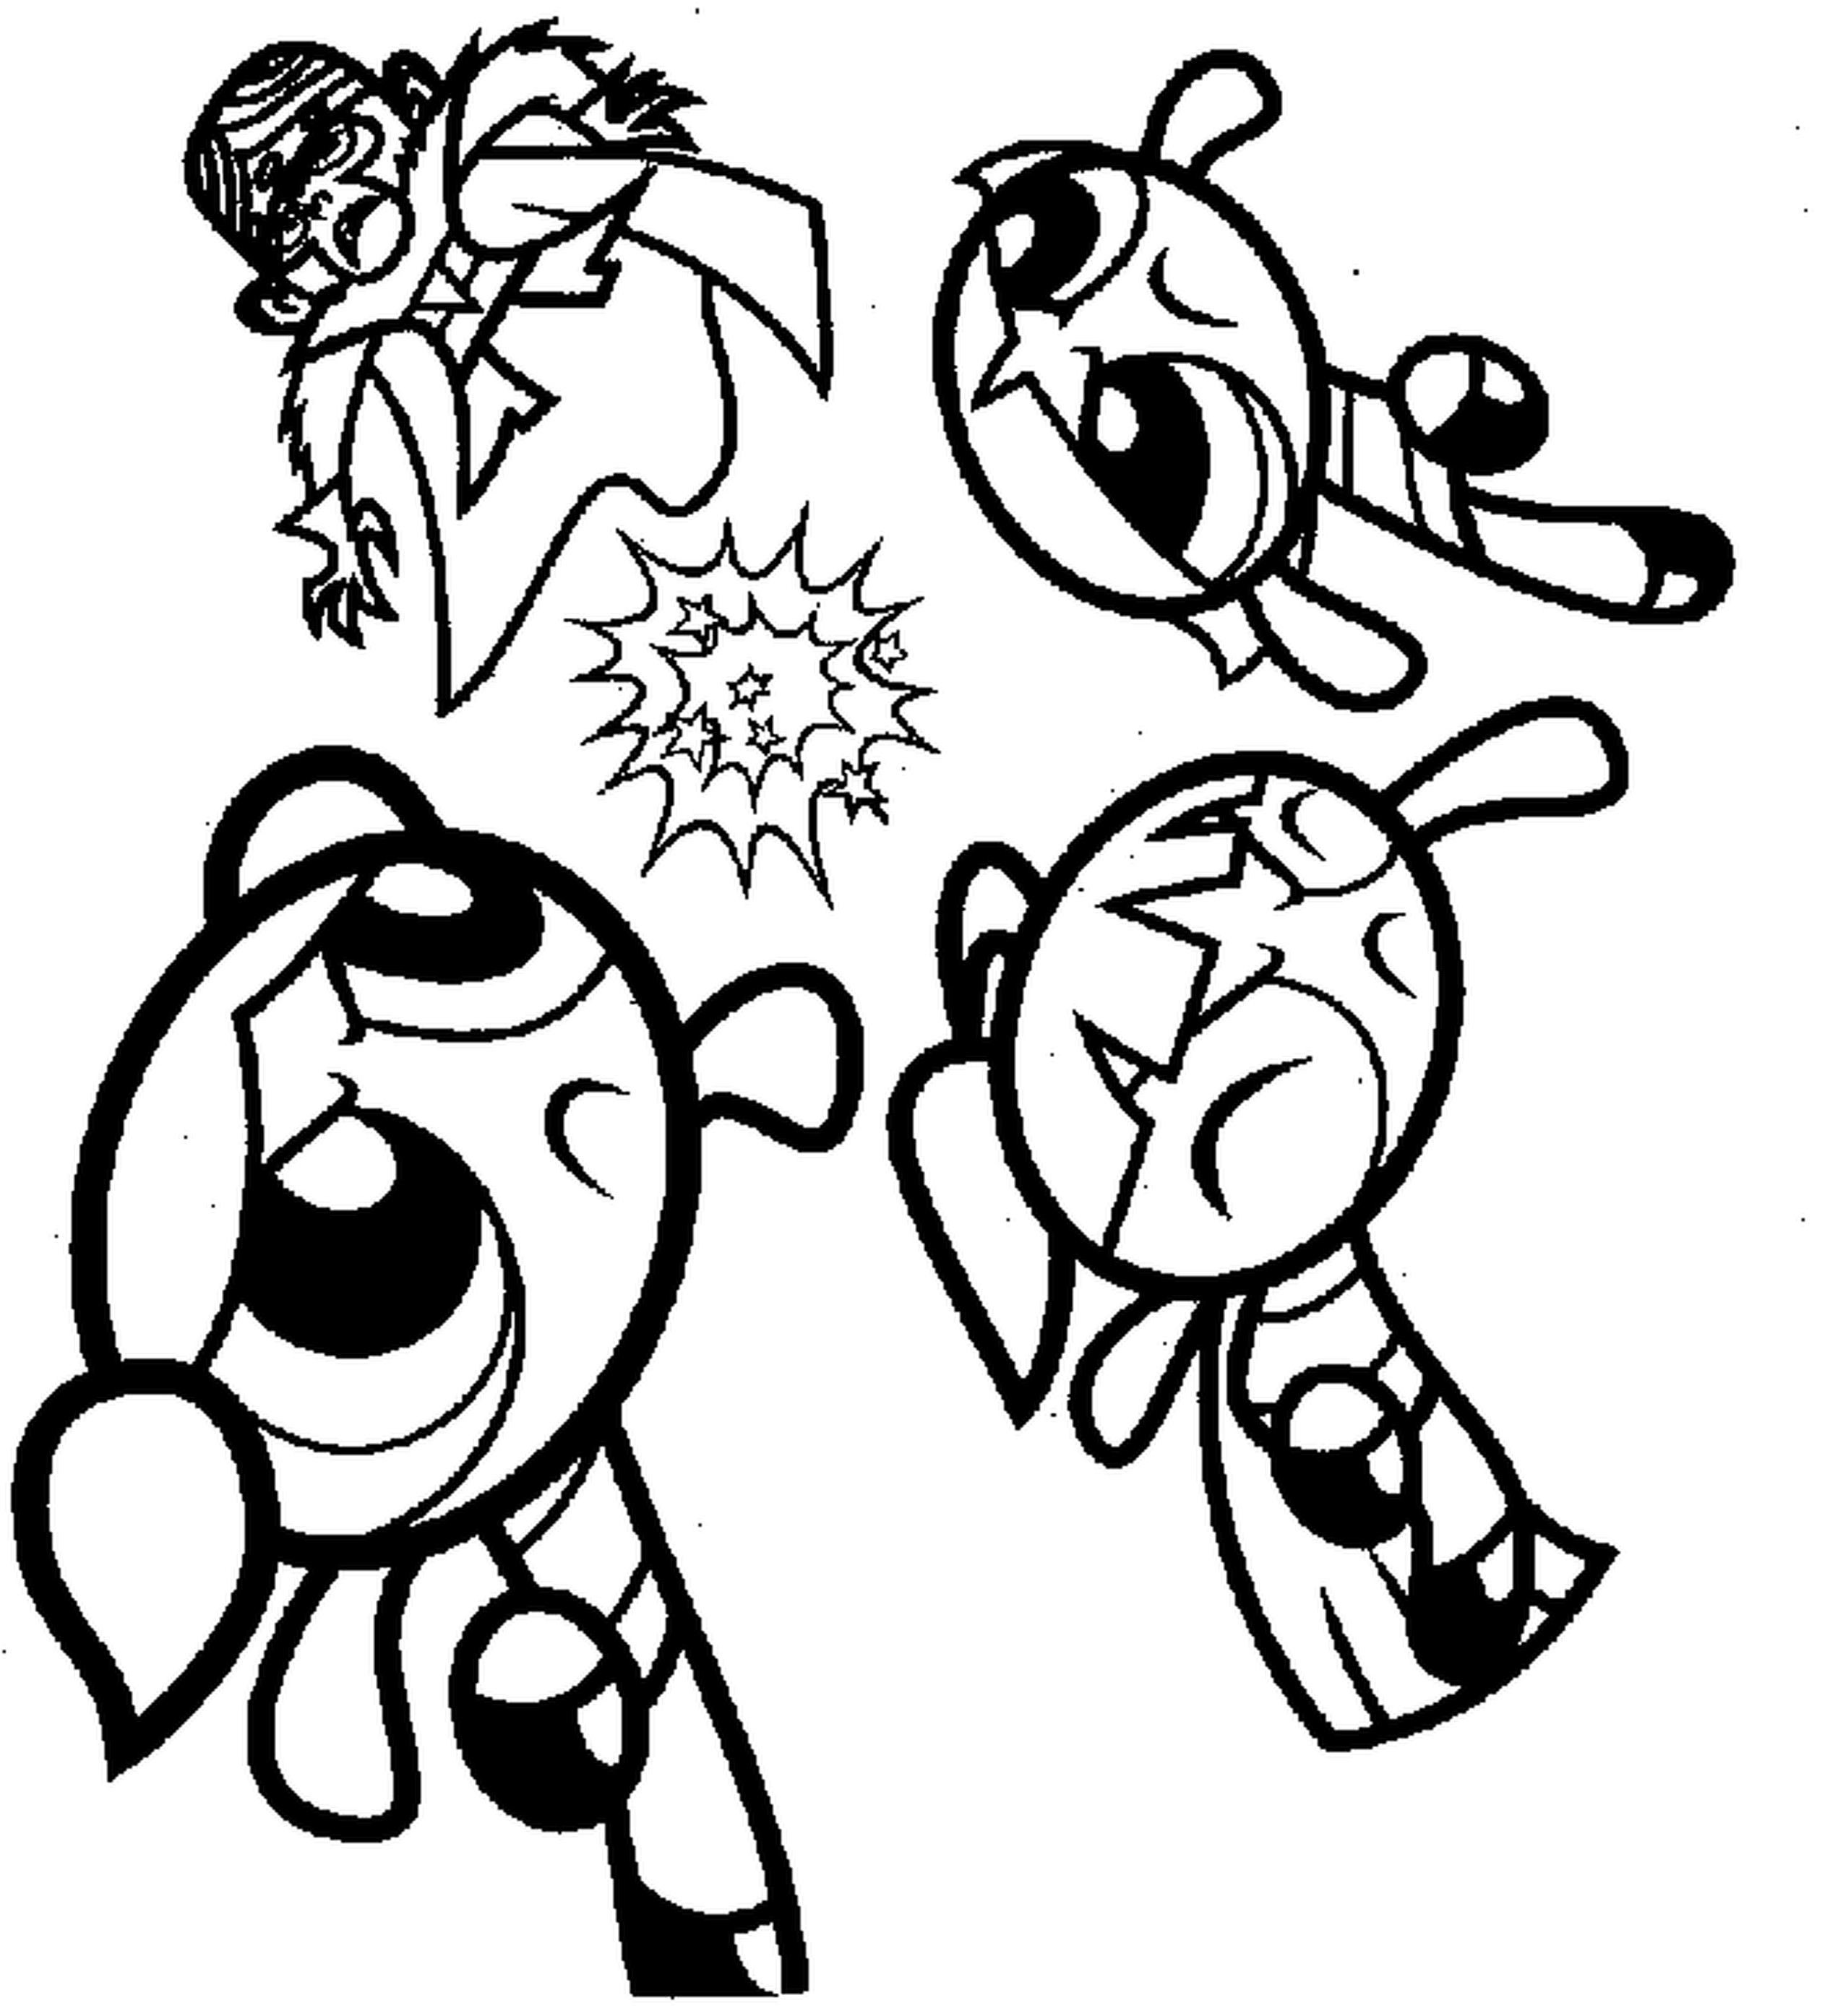 Powerpuff Girls Blossom Coloring Pages
 Powerpuff Girls Blossom Coloring Pages at GetColorings